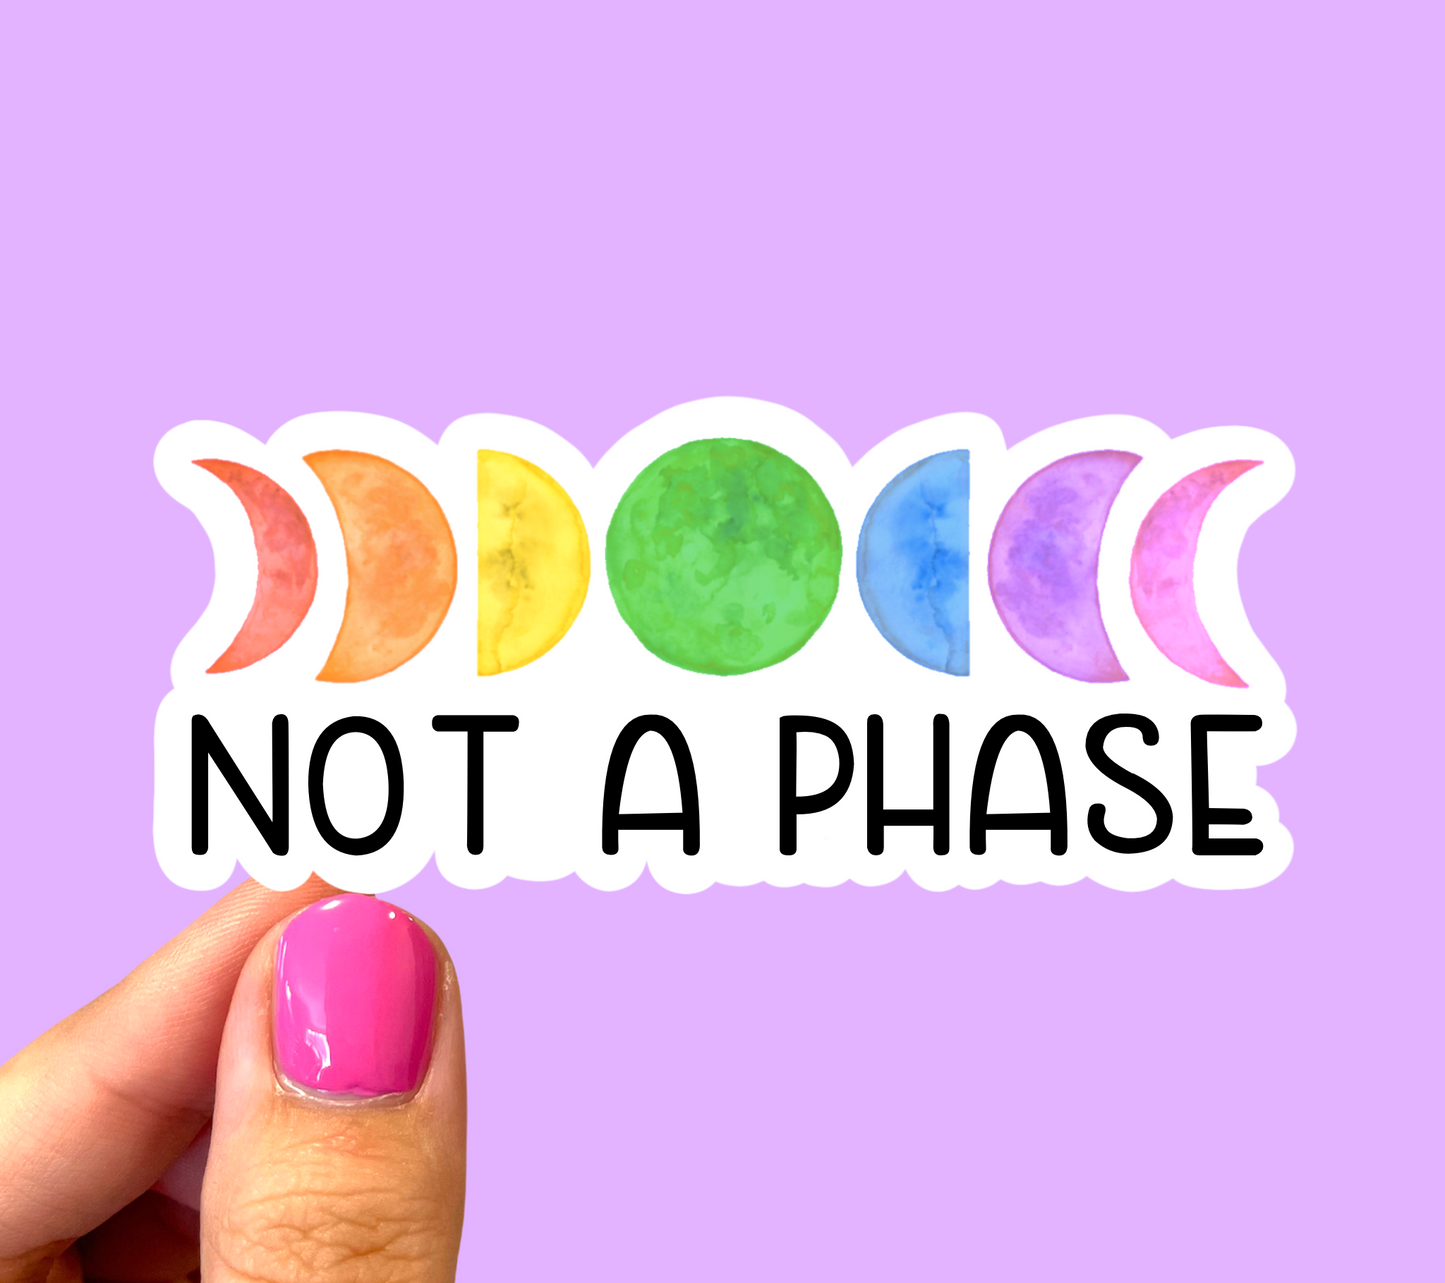 Not a phase sticker